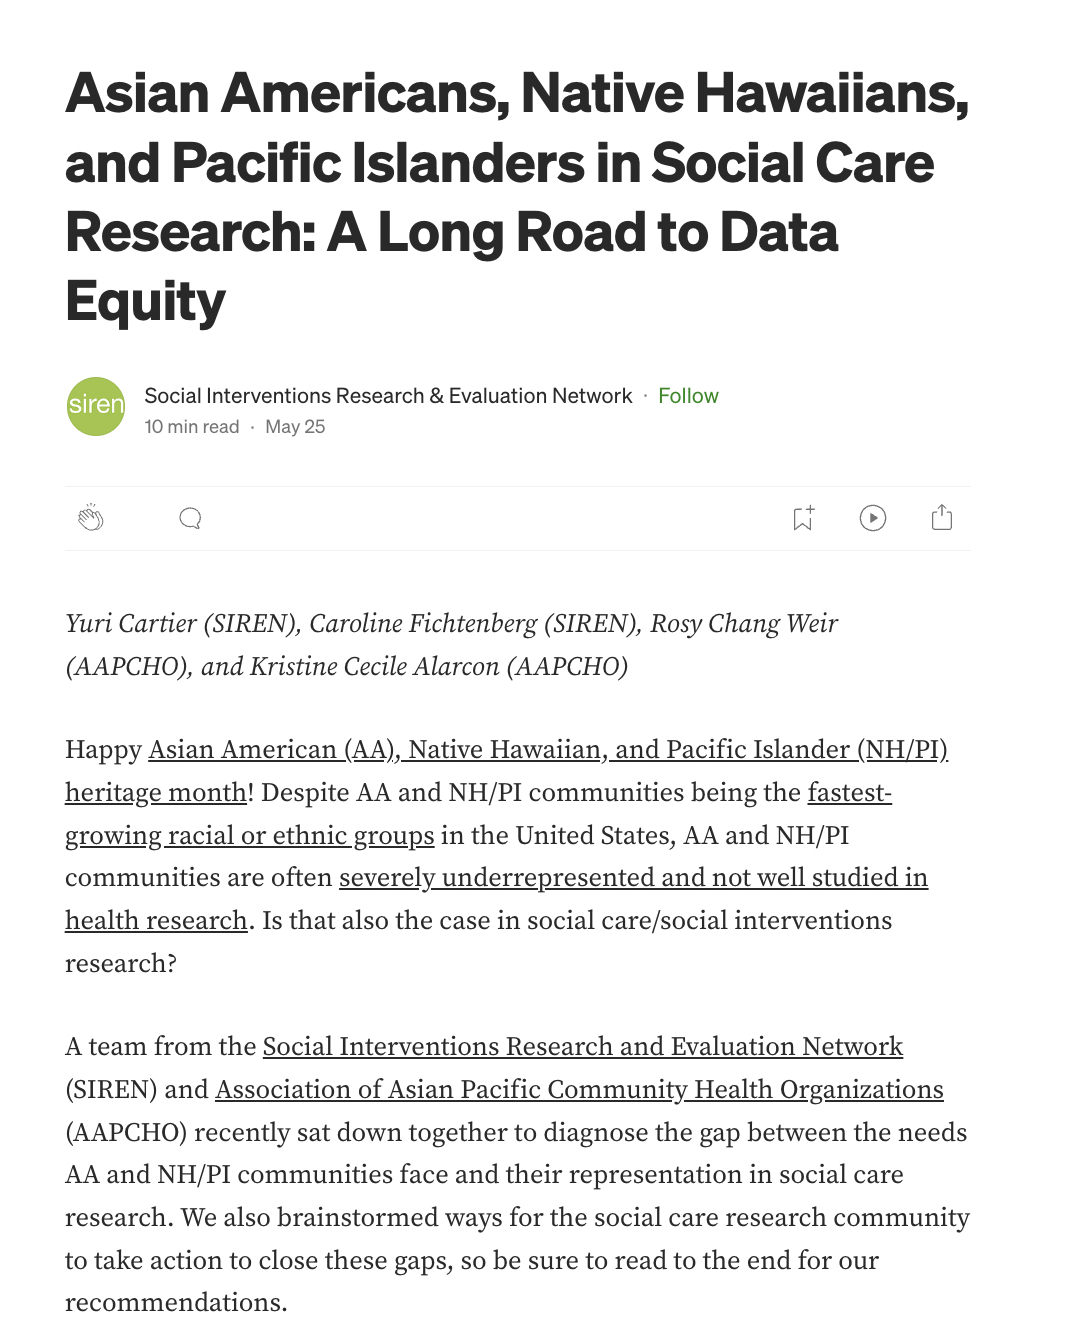 Asian Americans, Native Hawaiians, and Pacific Islanders in Social Care Research: A Long Road to Data Equity